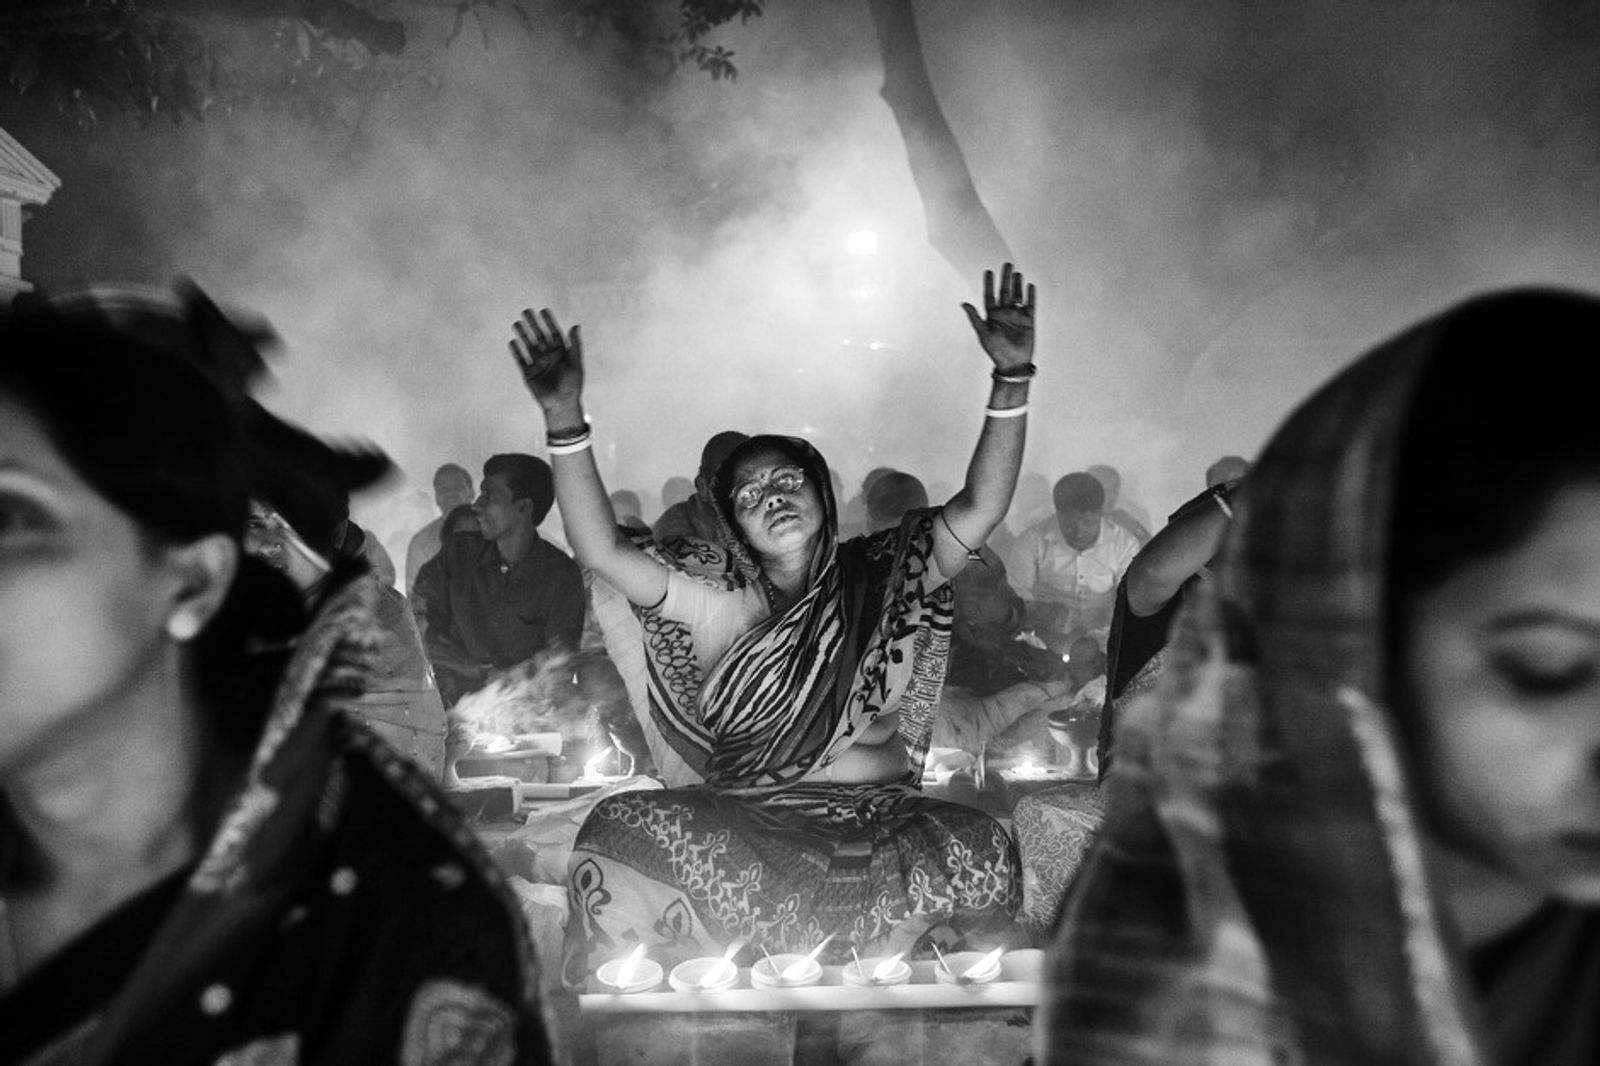 © Suvra Kanti Das - Image from the Rakher Upobash photography project